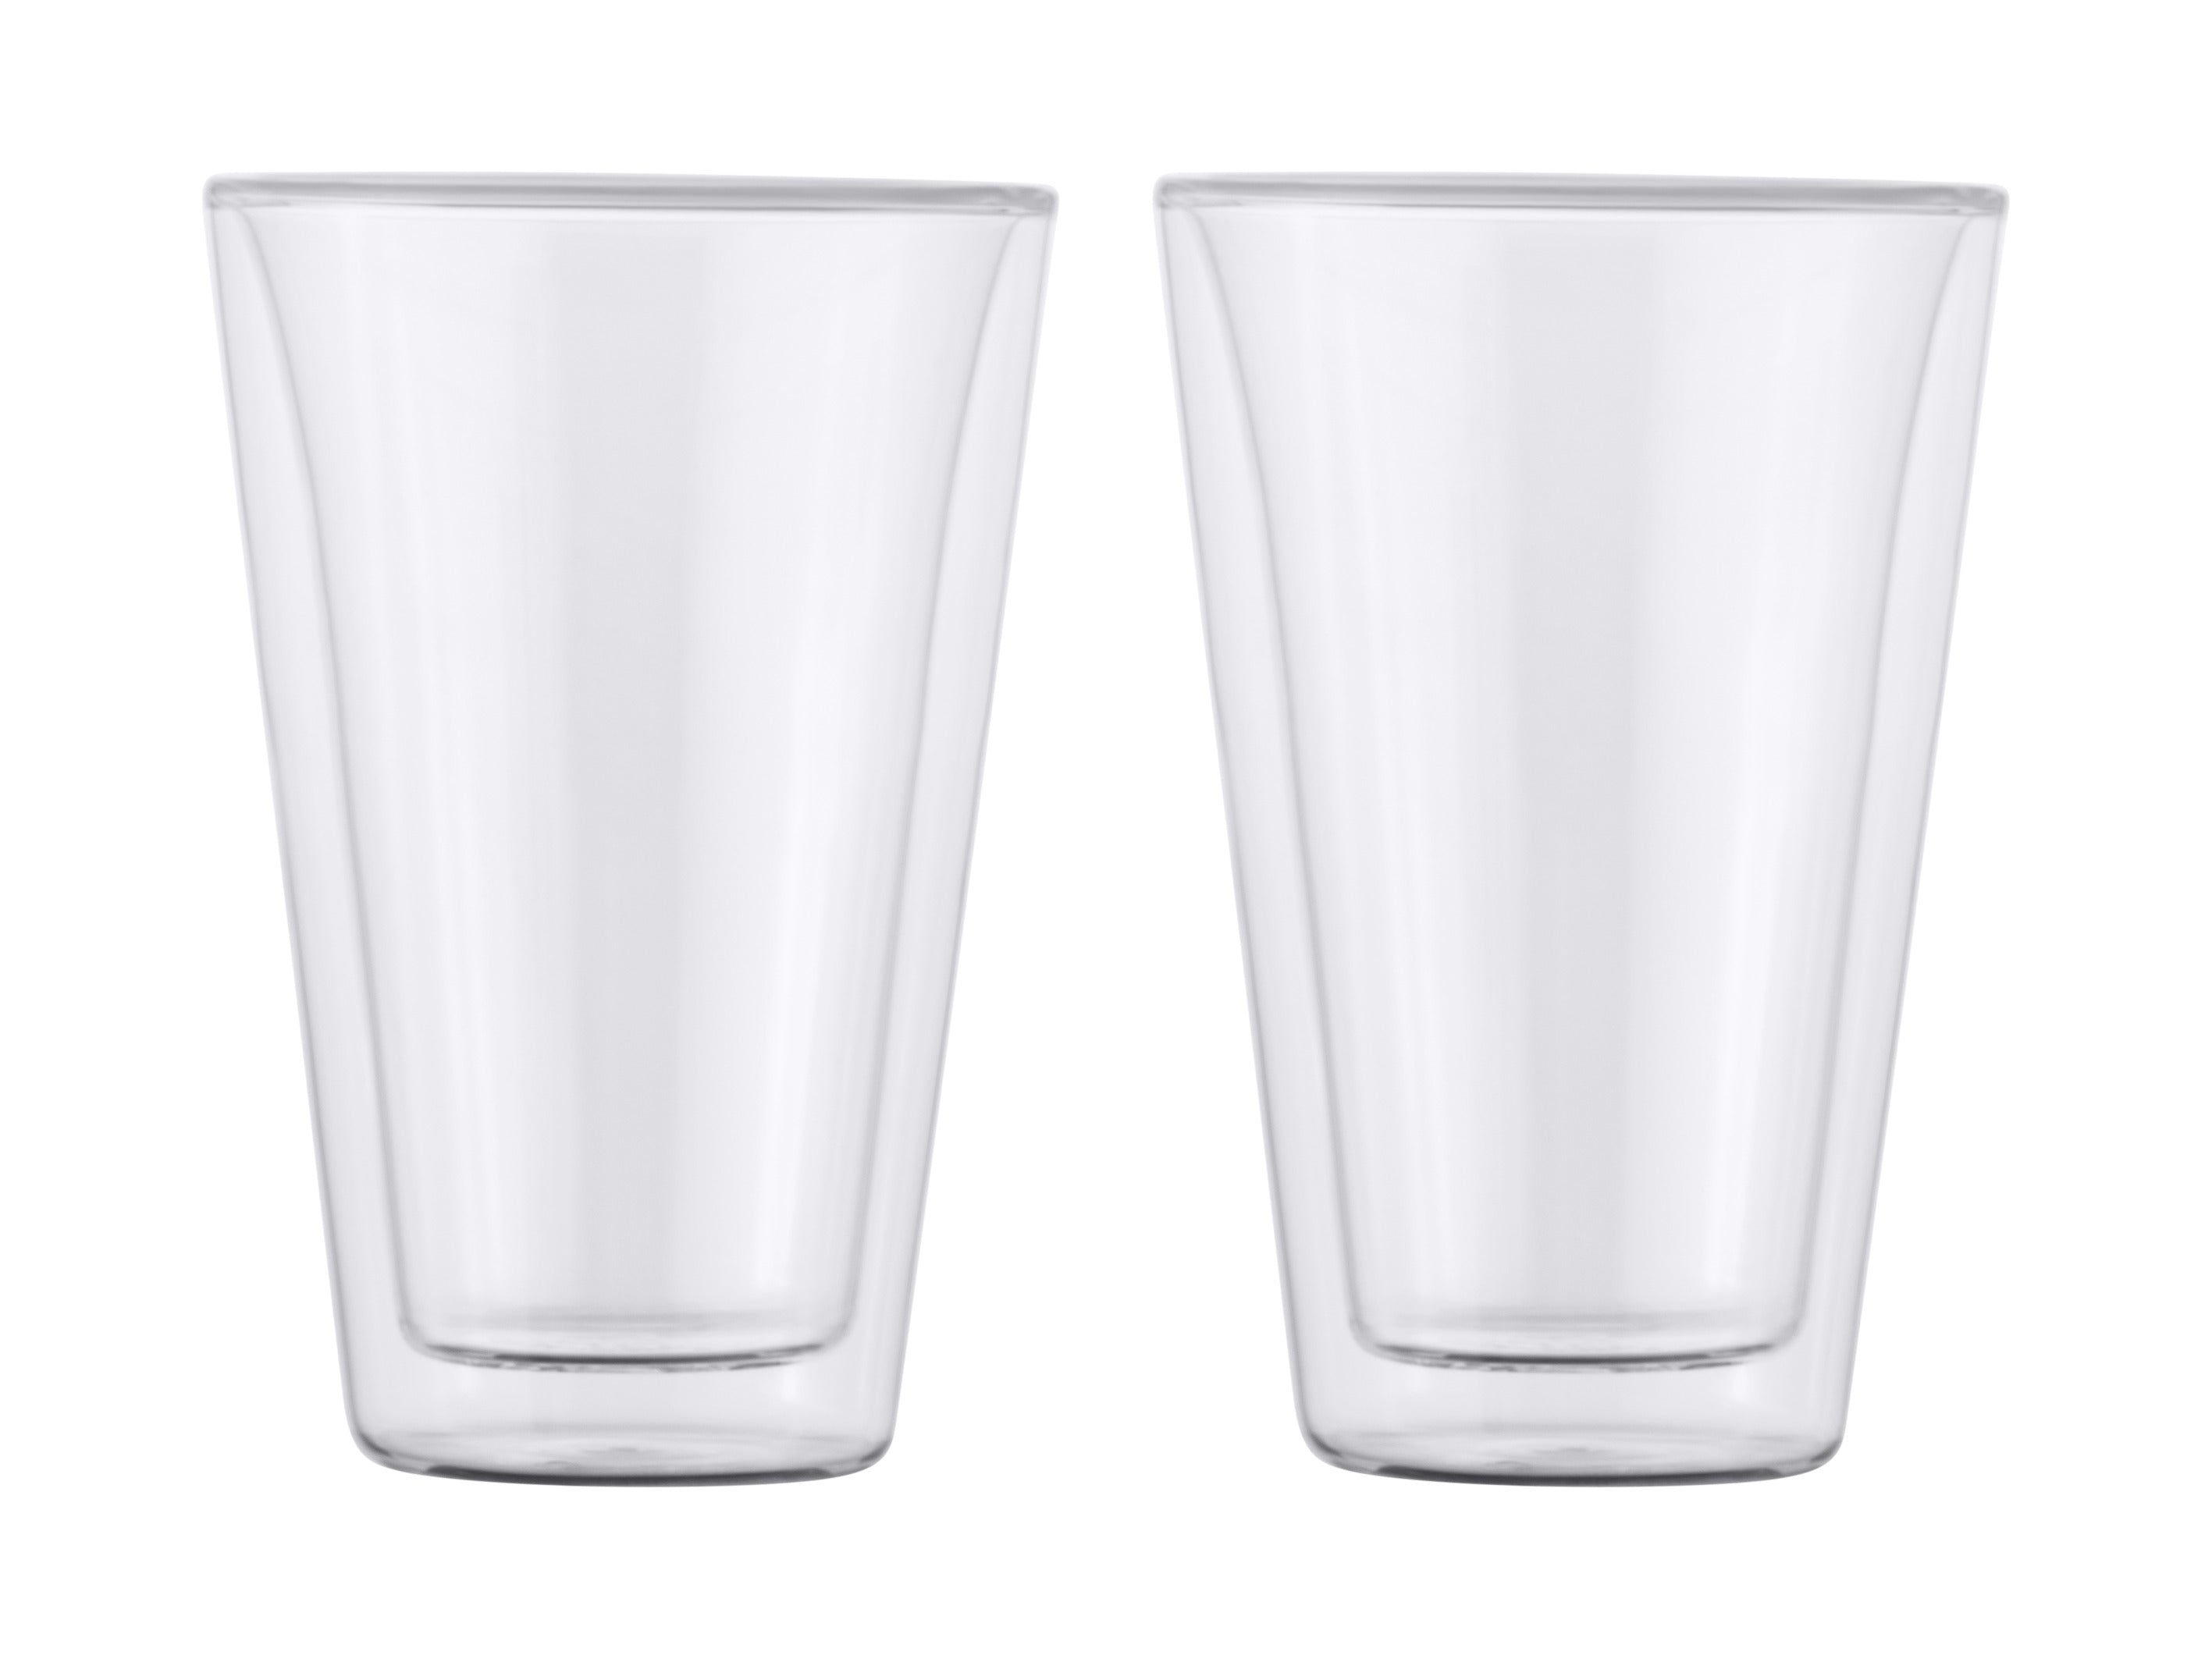 Maxwell & Williams Blend Double Wall Conical Cups 400ml Set of 2